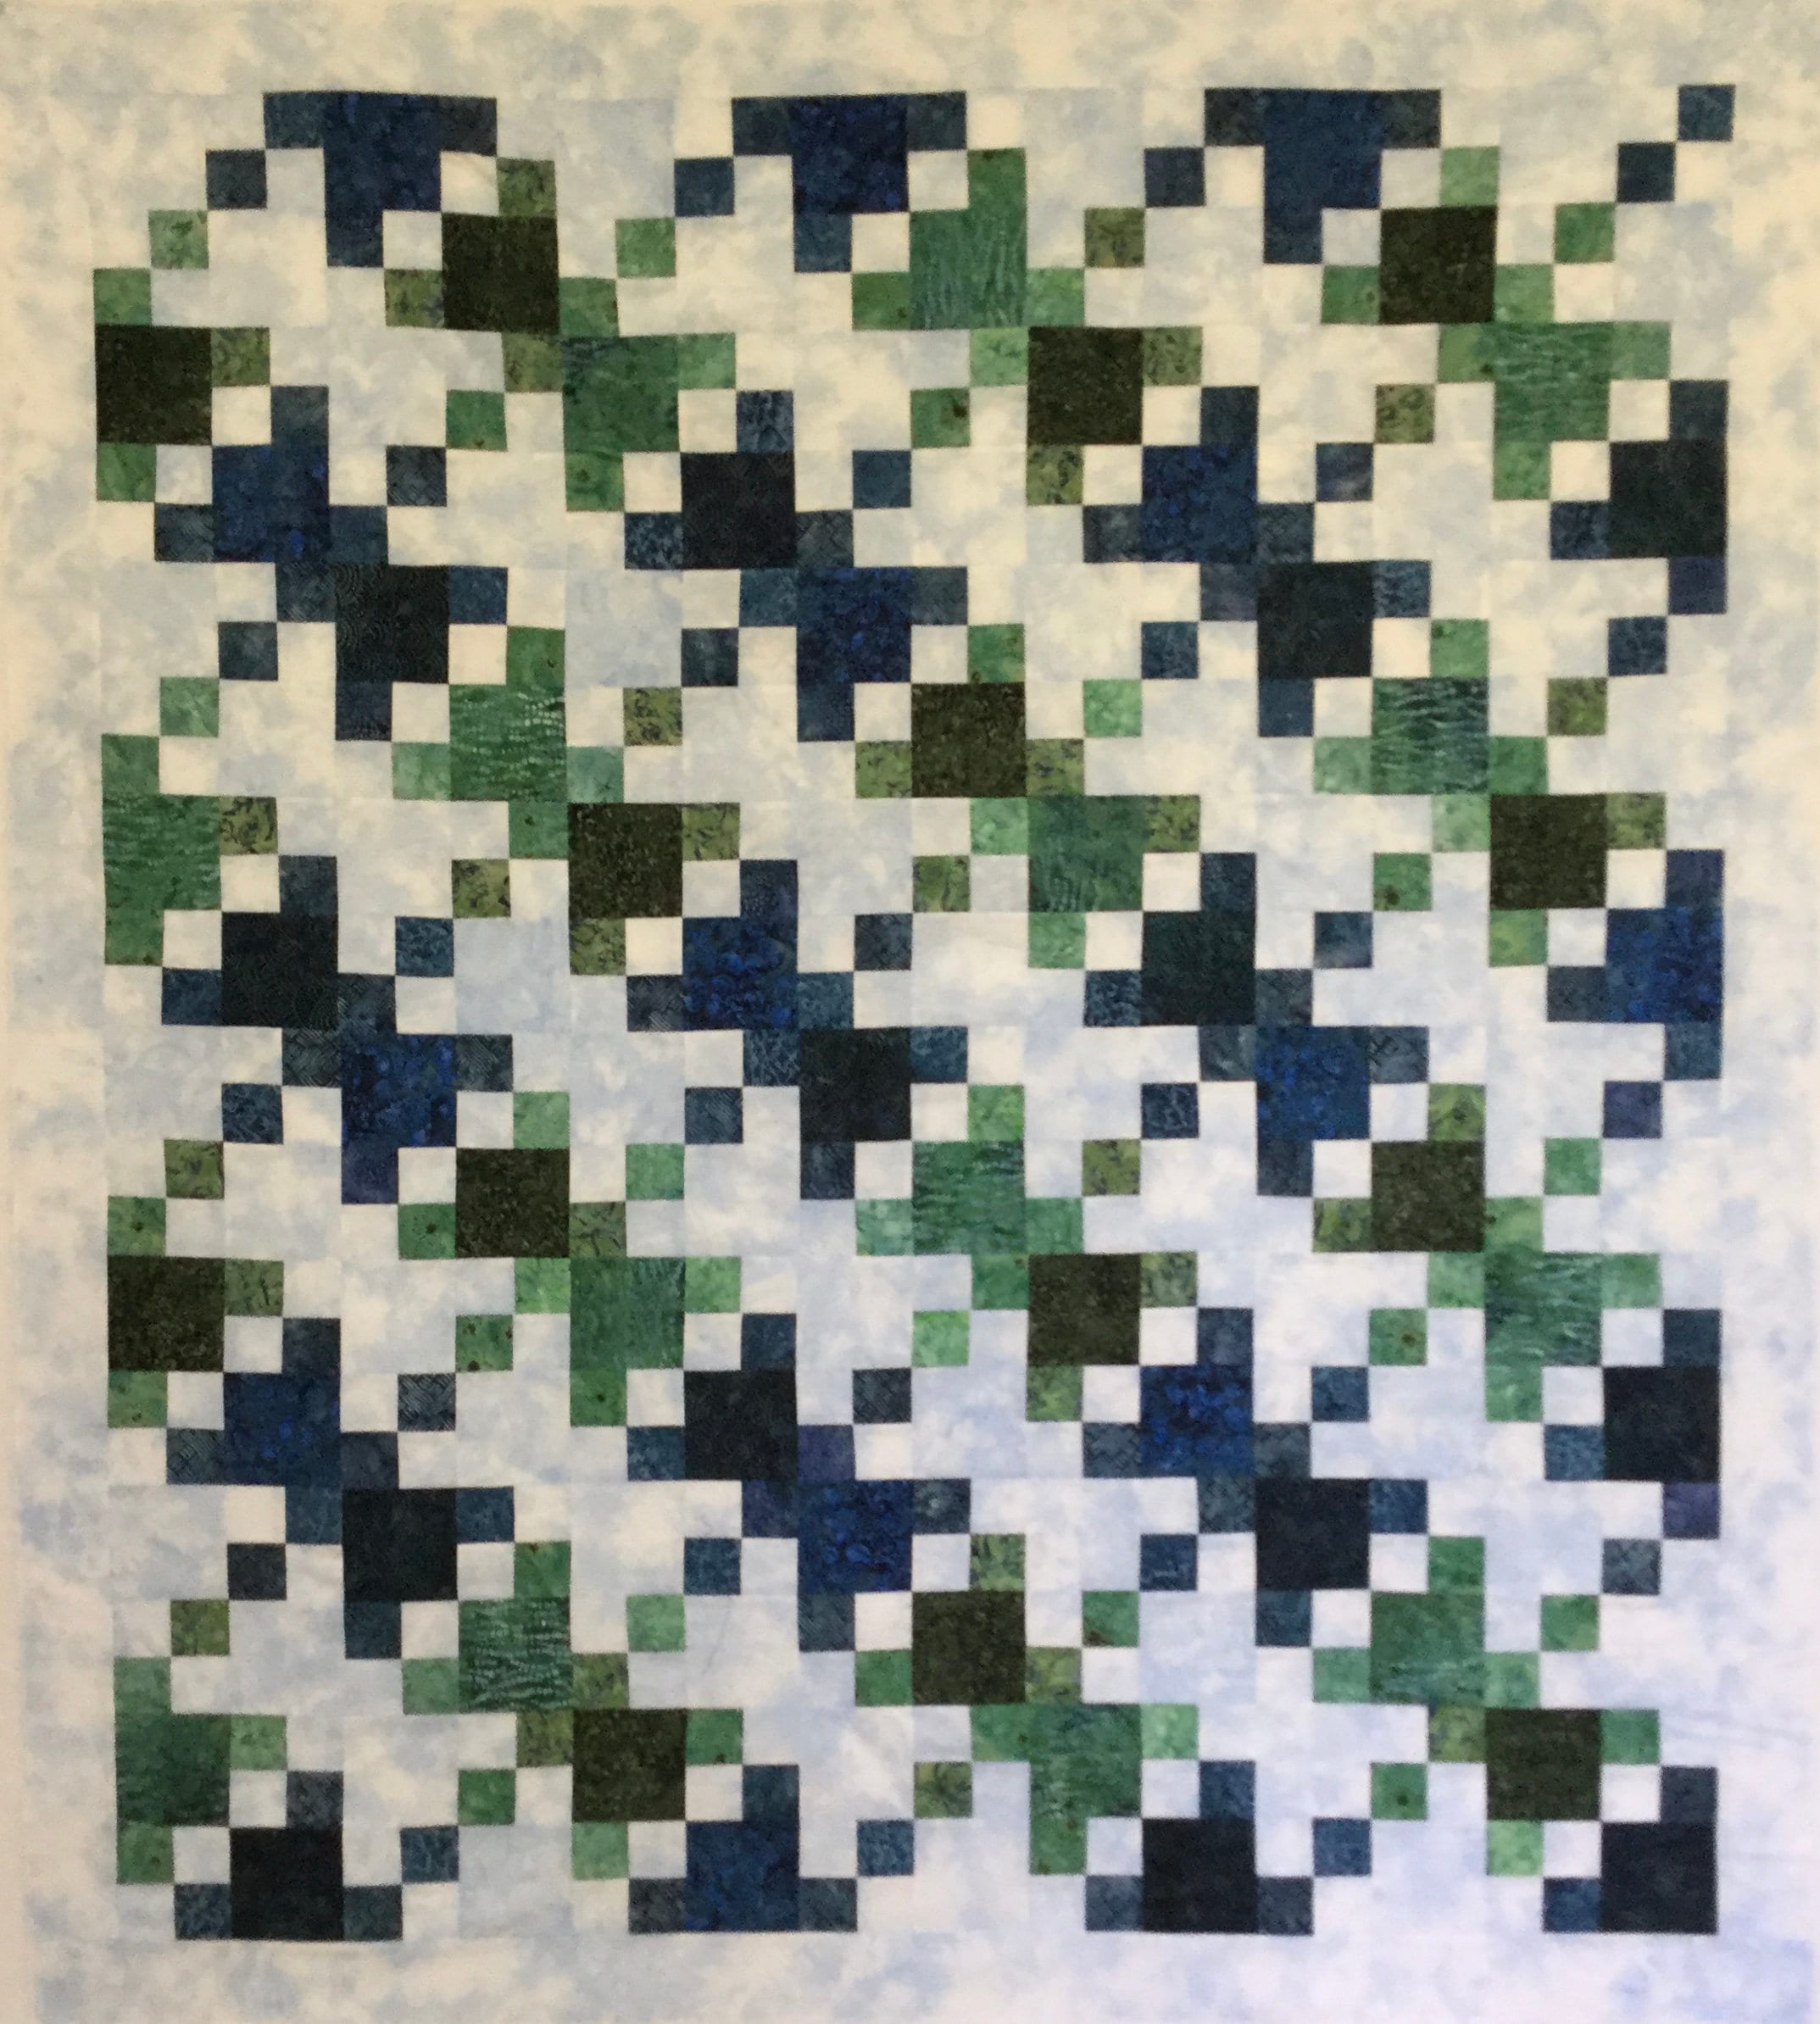 Quick As A Wink -3 Yard Quilts